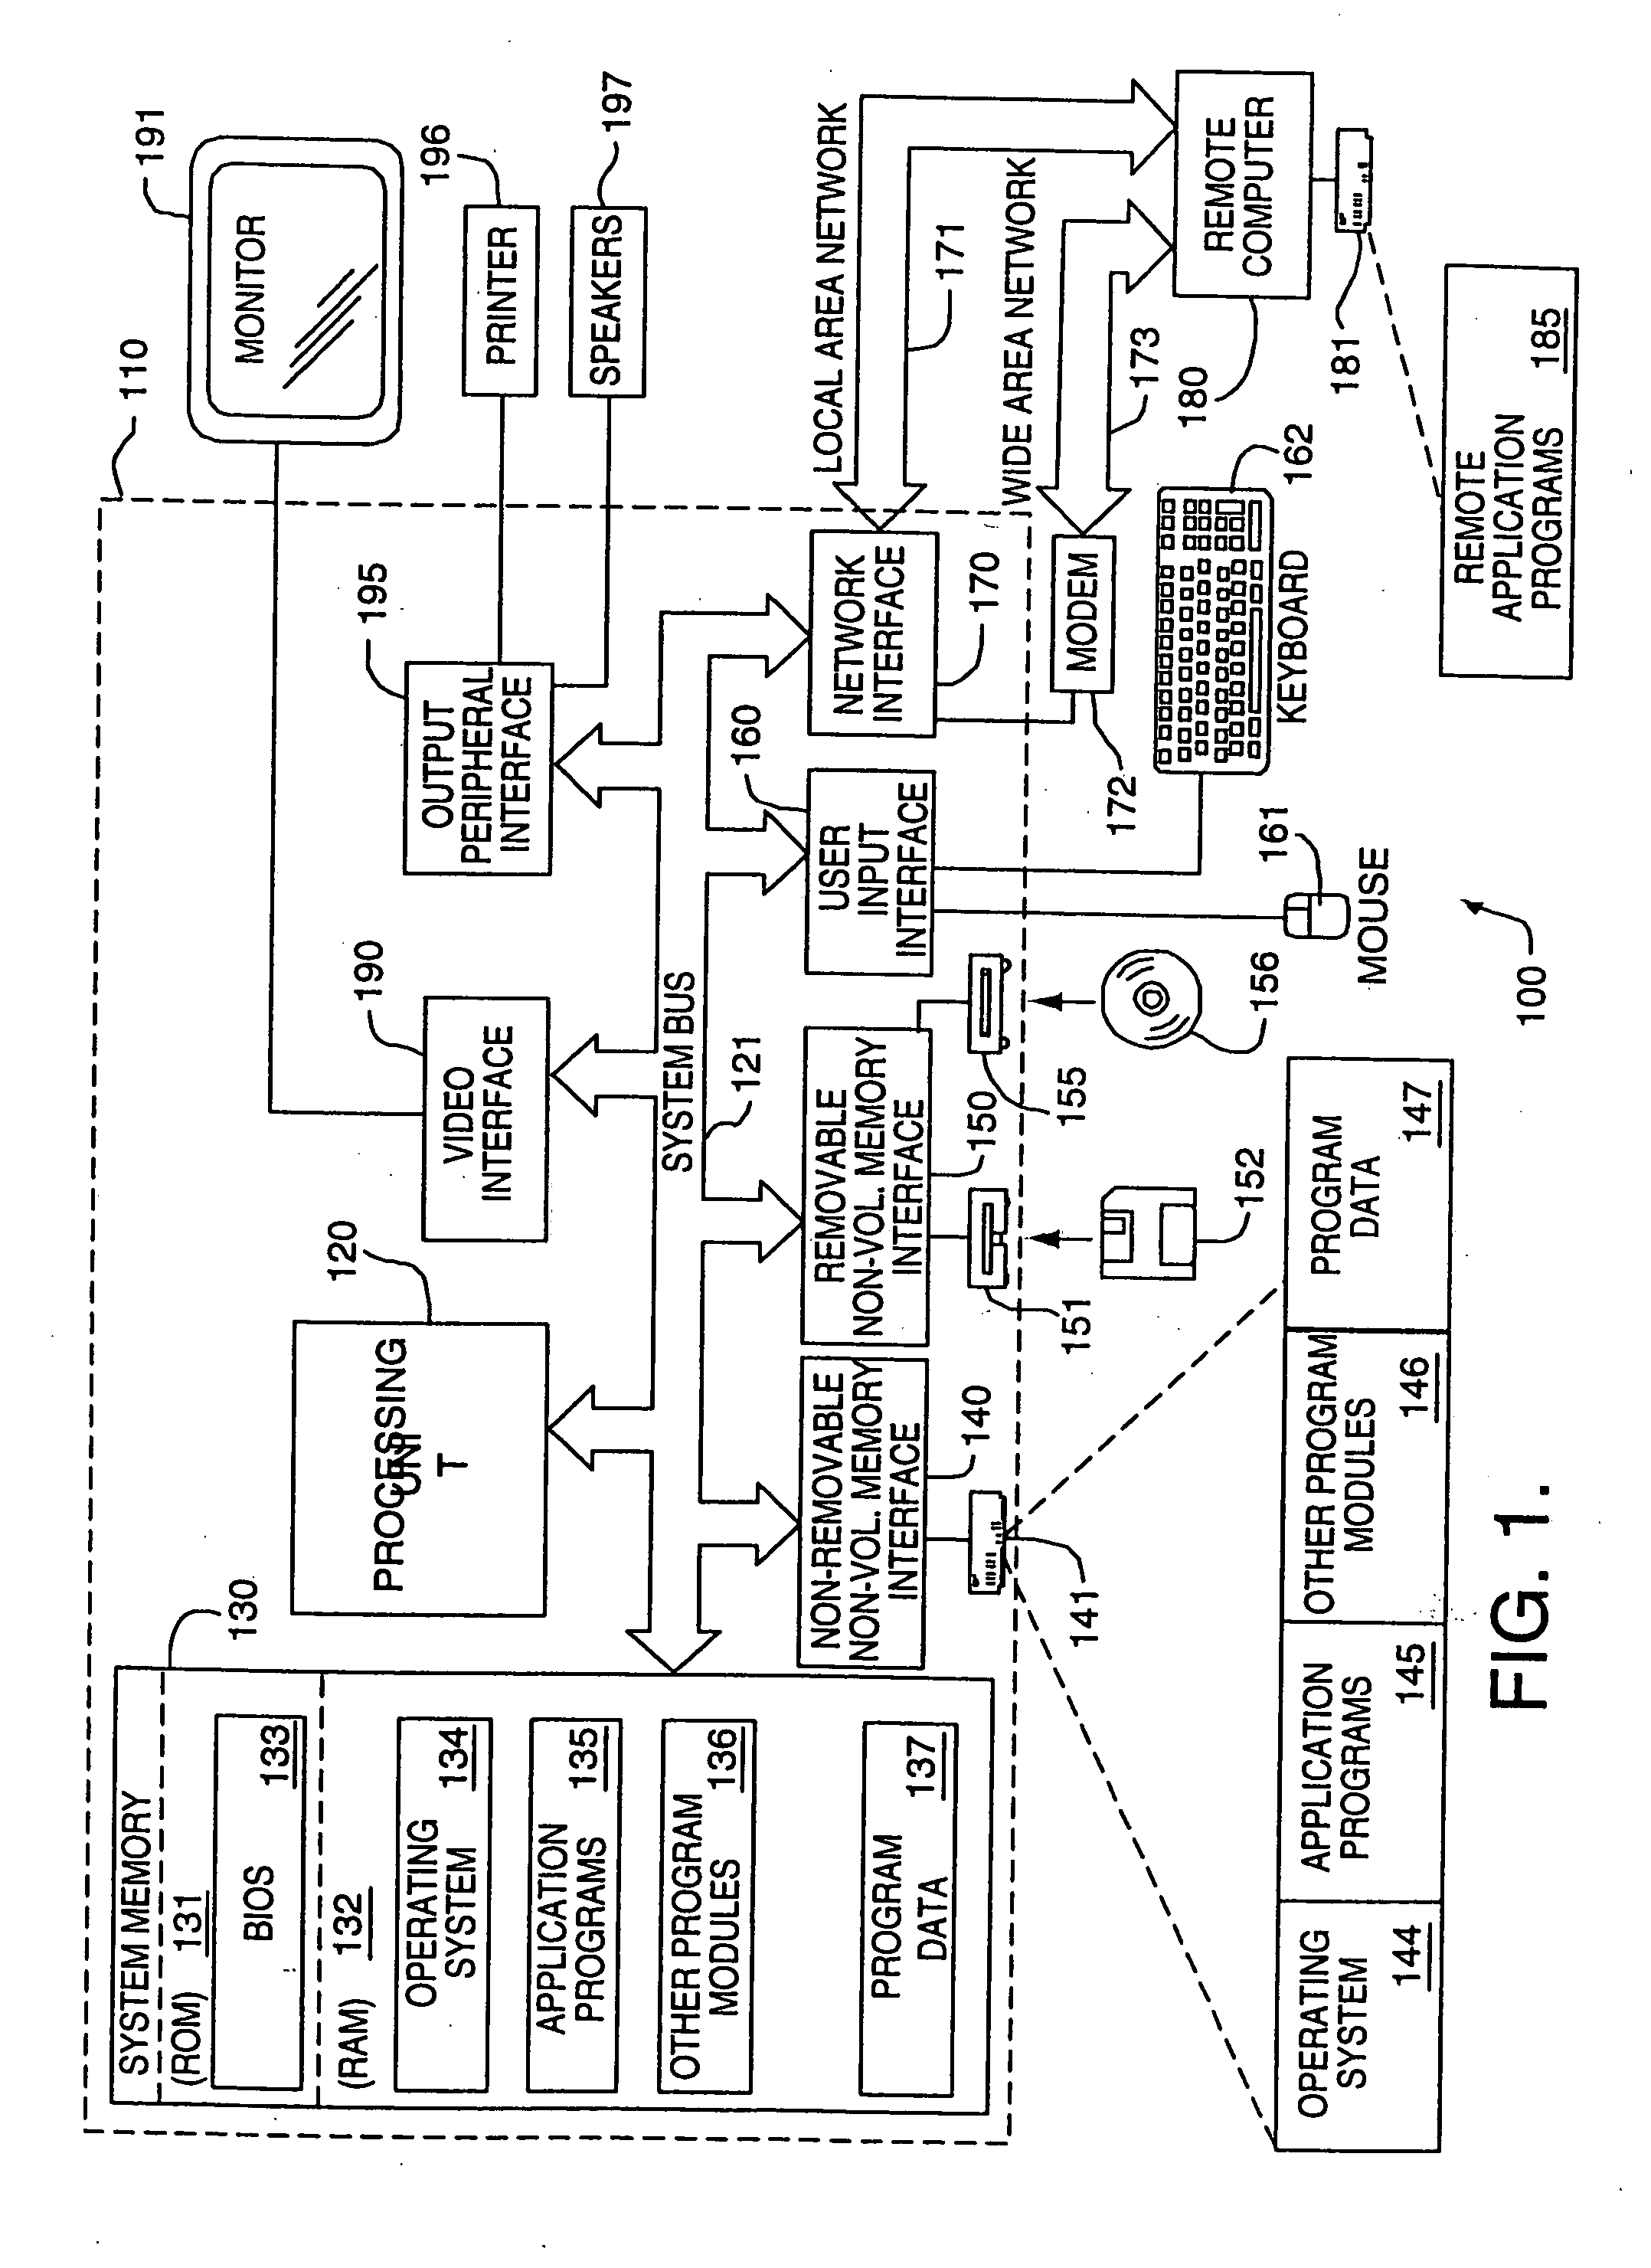 User interface and operating system for presenting the contents of a content collection based on content type